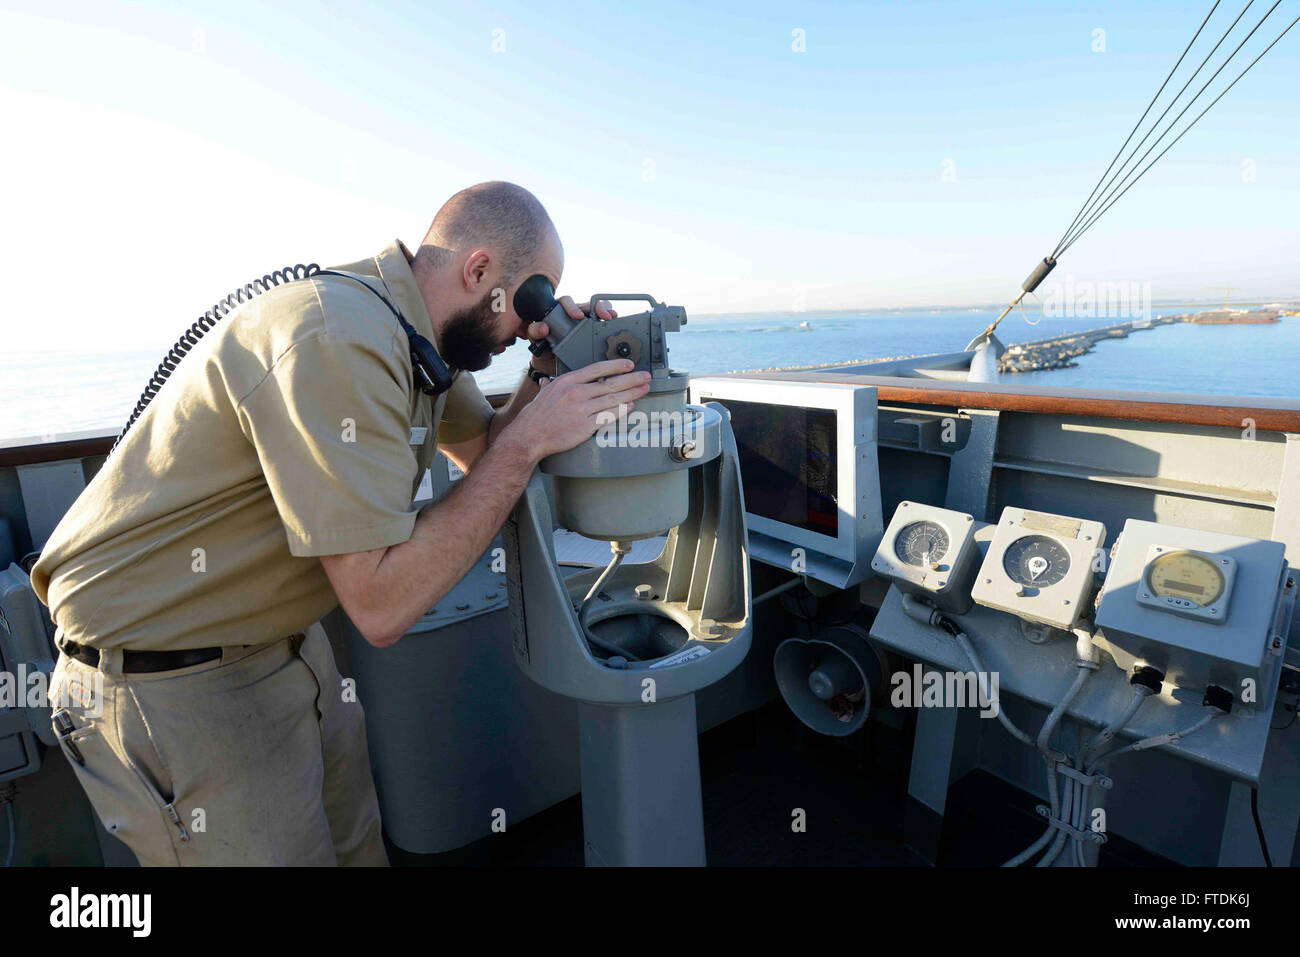 160226-N-VY489-022 LIMASSOL, Cyprus (Feb. 26, 2016) Lt. Benjamin McIntire, USS Mount Whitney (LCC 20) navigator, looks through a telescopic alidade as the flagship arrives in Limassol, Cyprus, for a scheduled port visit Feb. 26, 2016. Mount Whitney, the U.S. 6th Fleet command and control ship, forward deployed to Gaeta, Italy, is conducting naval operations in the U.S. 6th Fleet area of operations in support of U.S. National security interest in Europe. (U.S. Navy Photo by Mass Communication Specialist 1st Class Mike Wright/ Released) Stock Photo